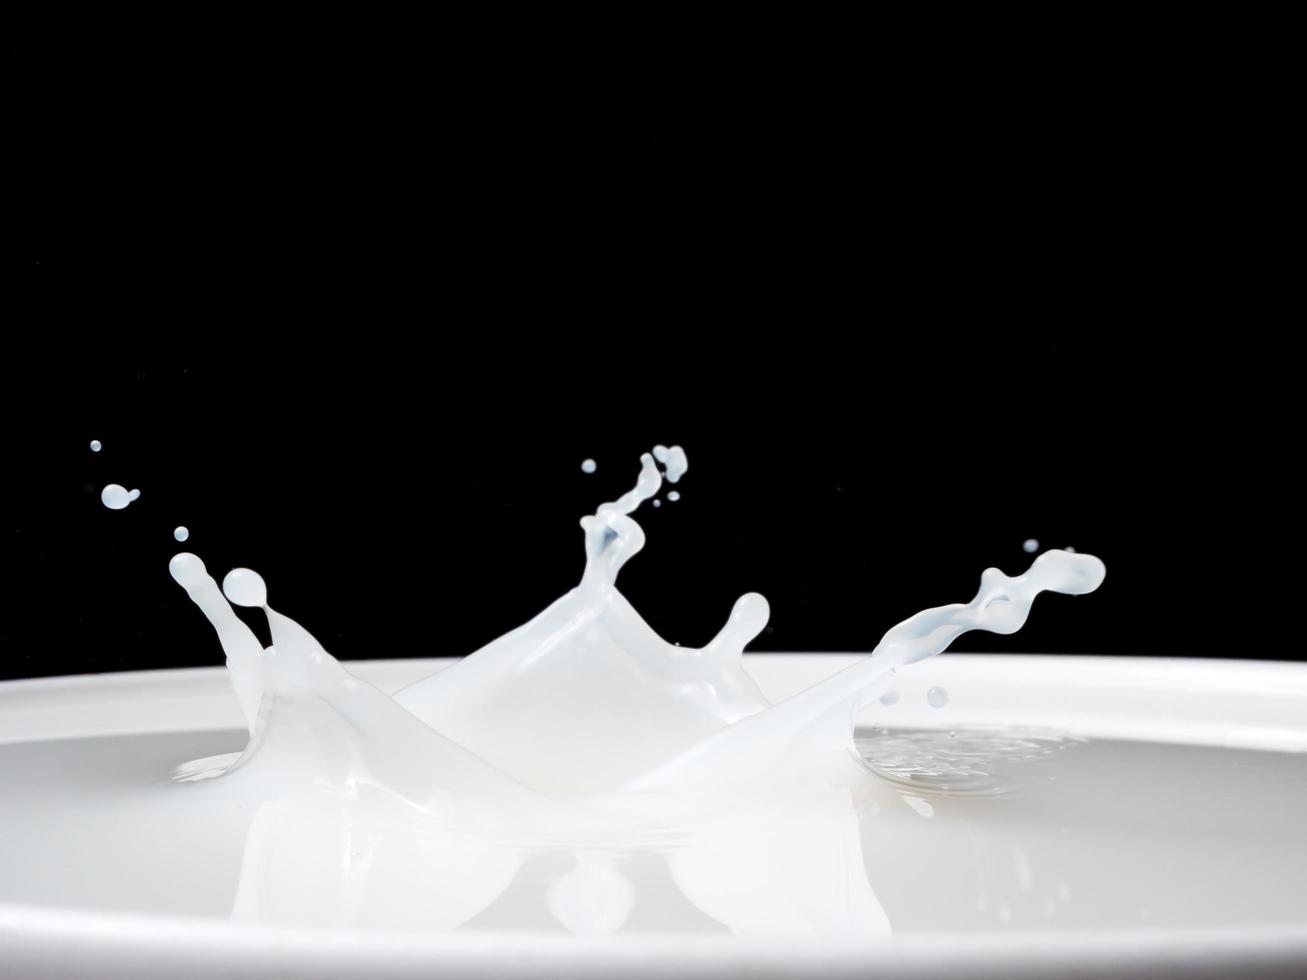 Splash of milk from a cup on black background. photo